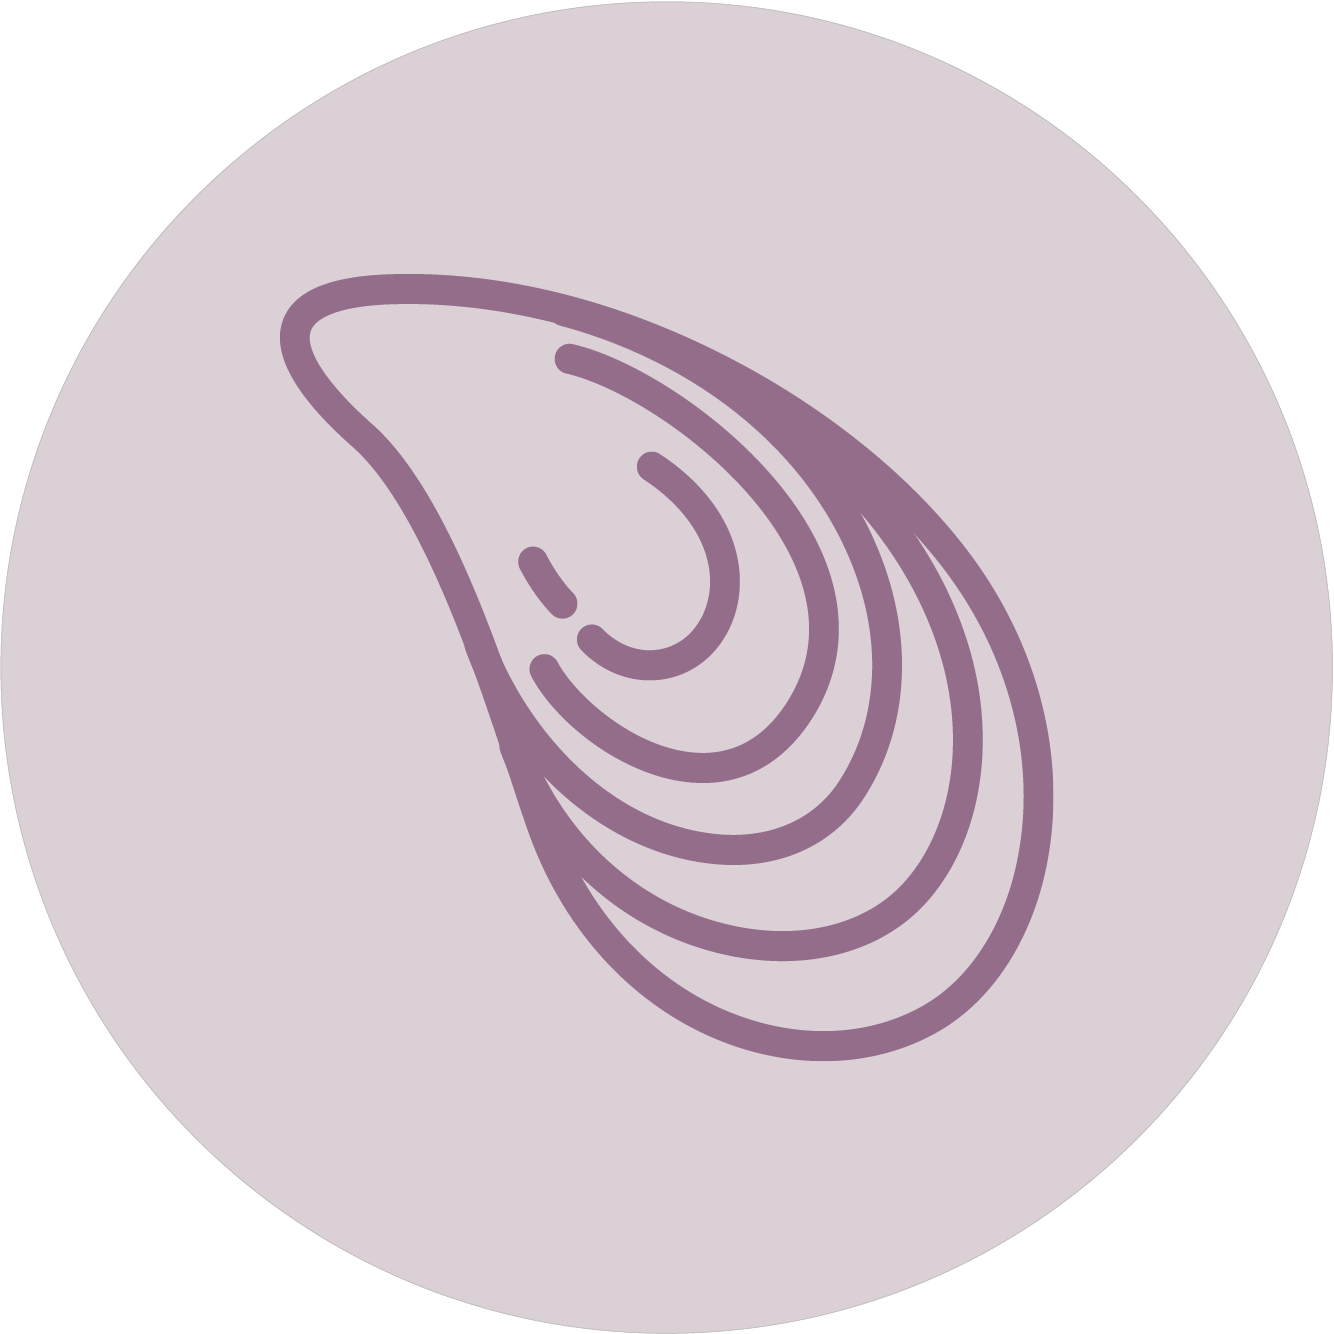 A graphic of a stylized Green Lipped Mussel on a circular purple background.